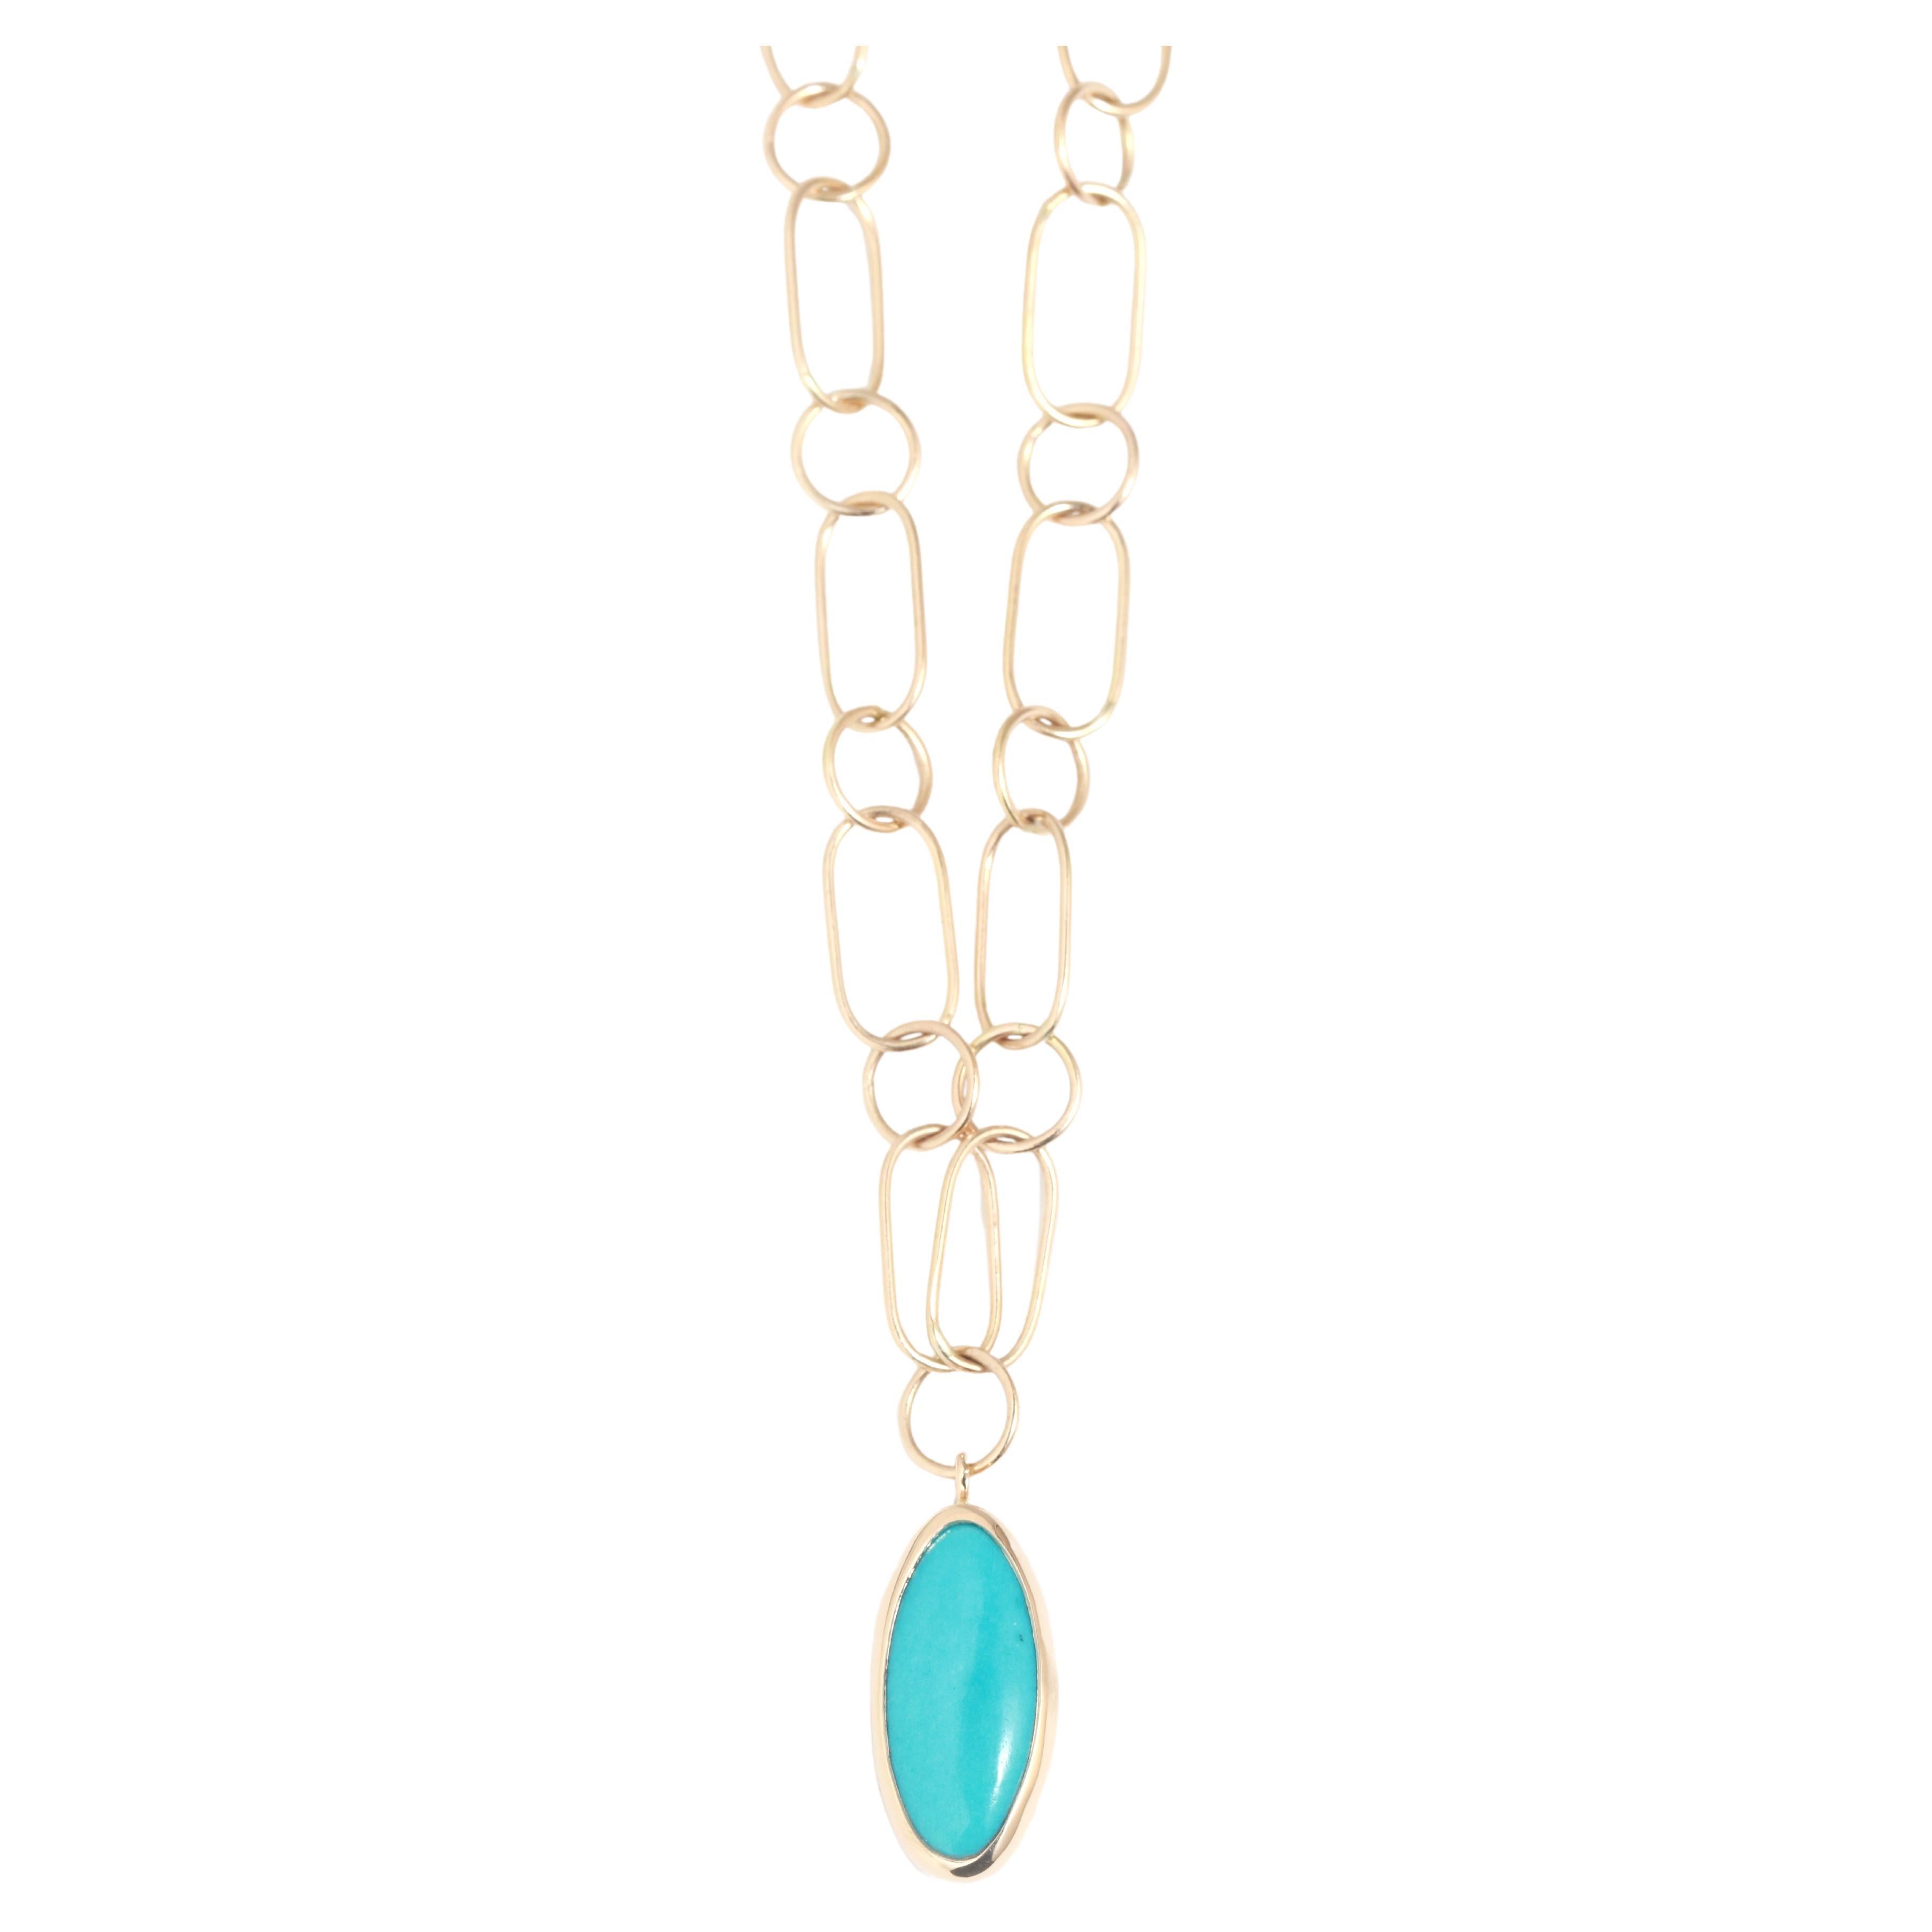 14k Yellow Gold Turquoise Necklace with Handmade Chain